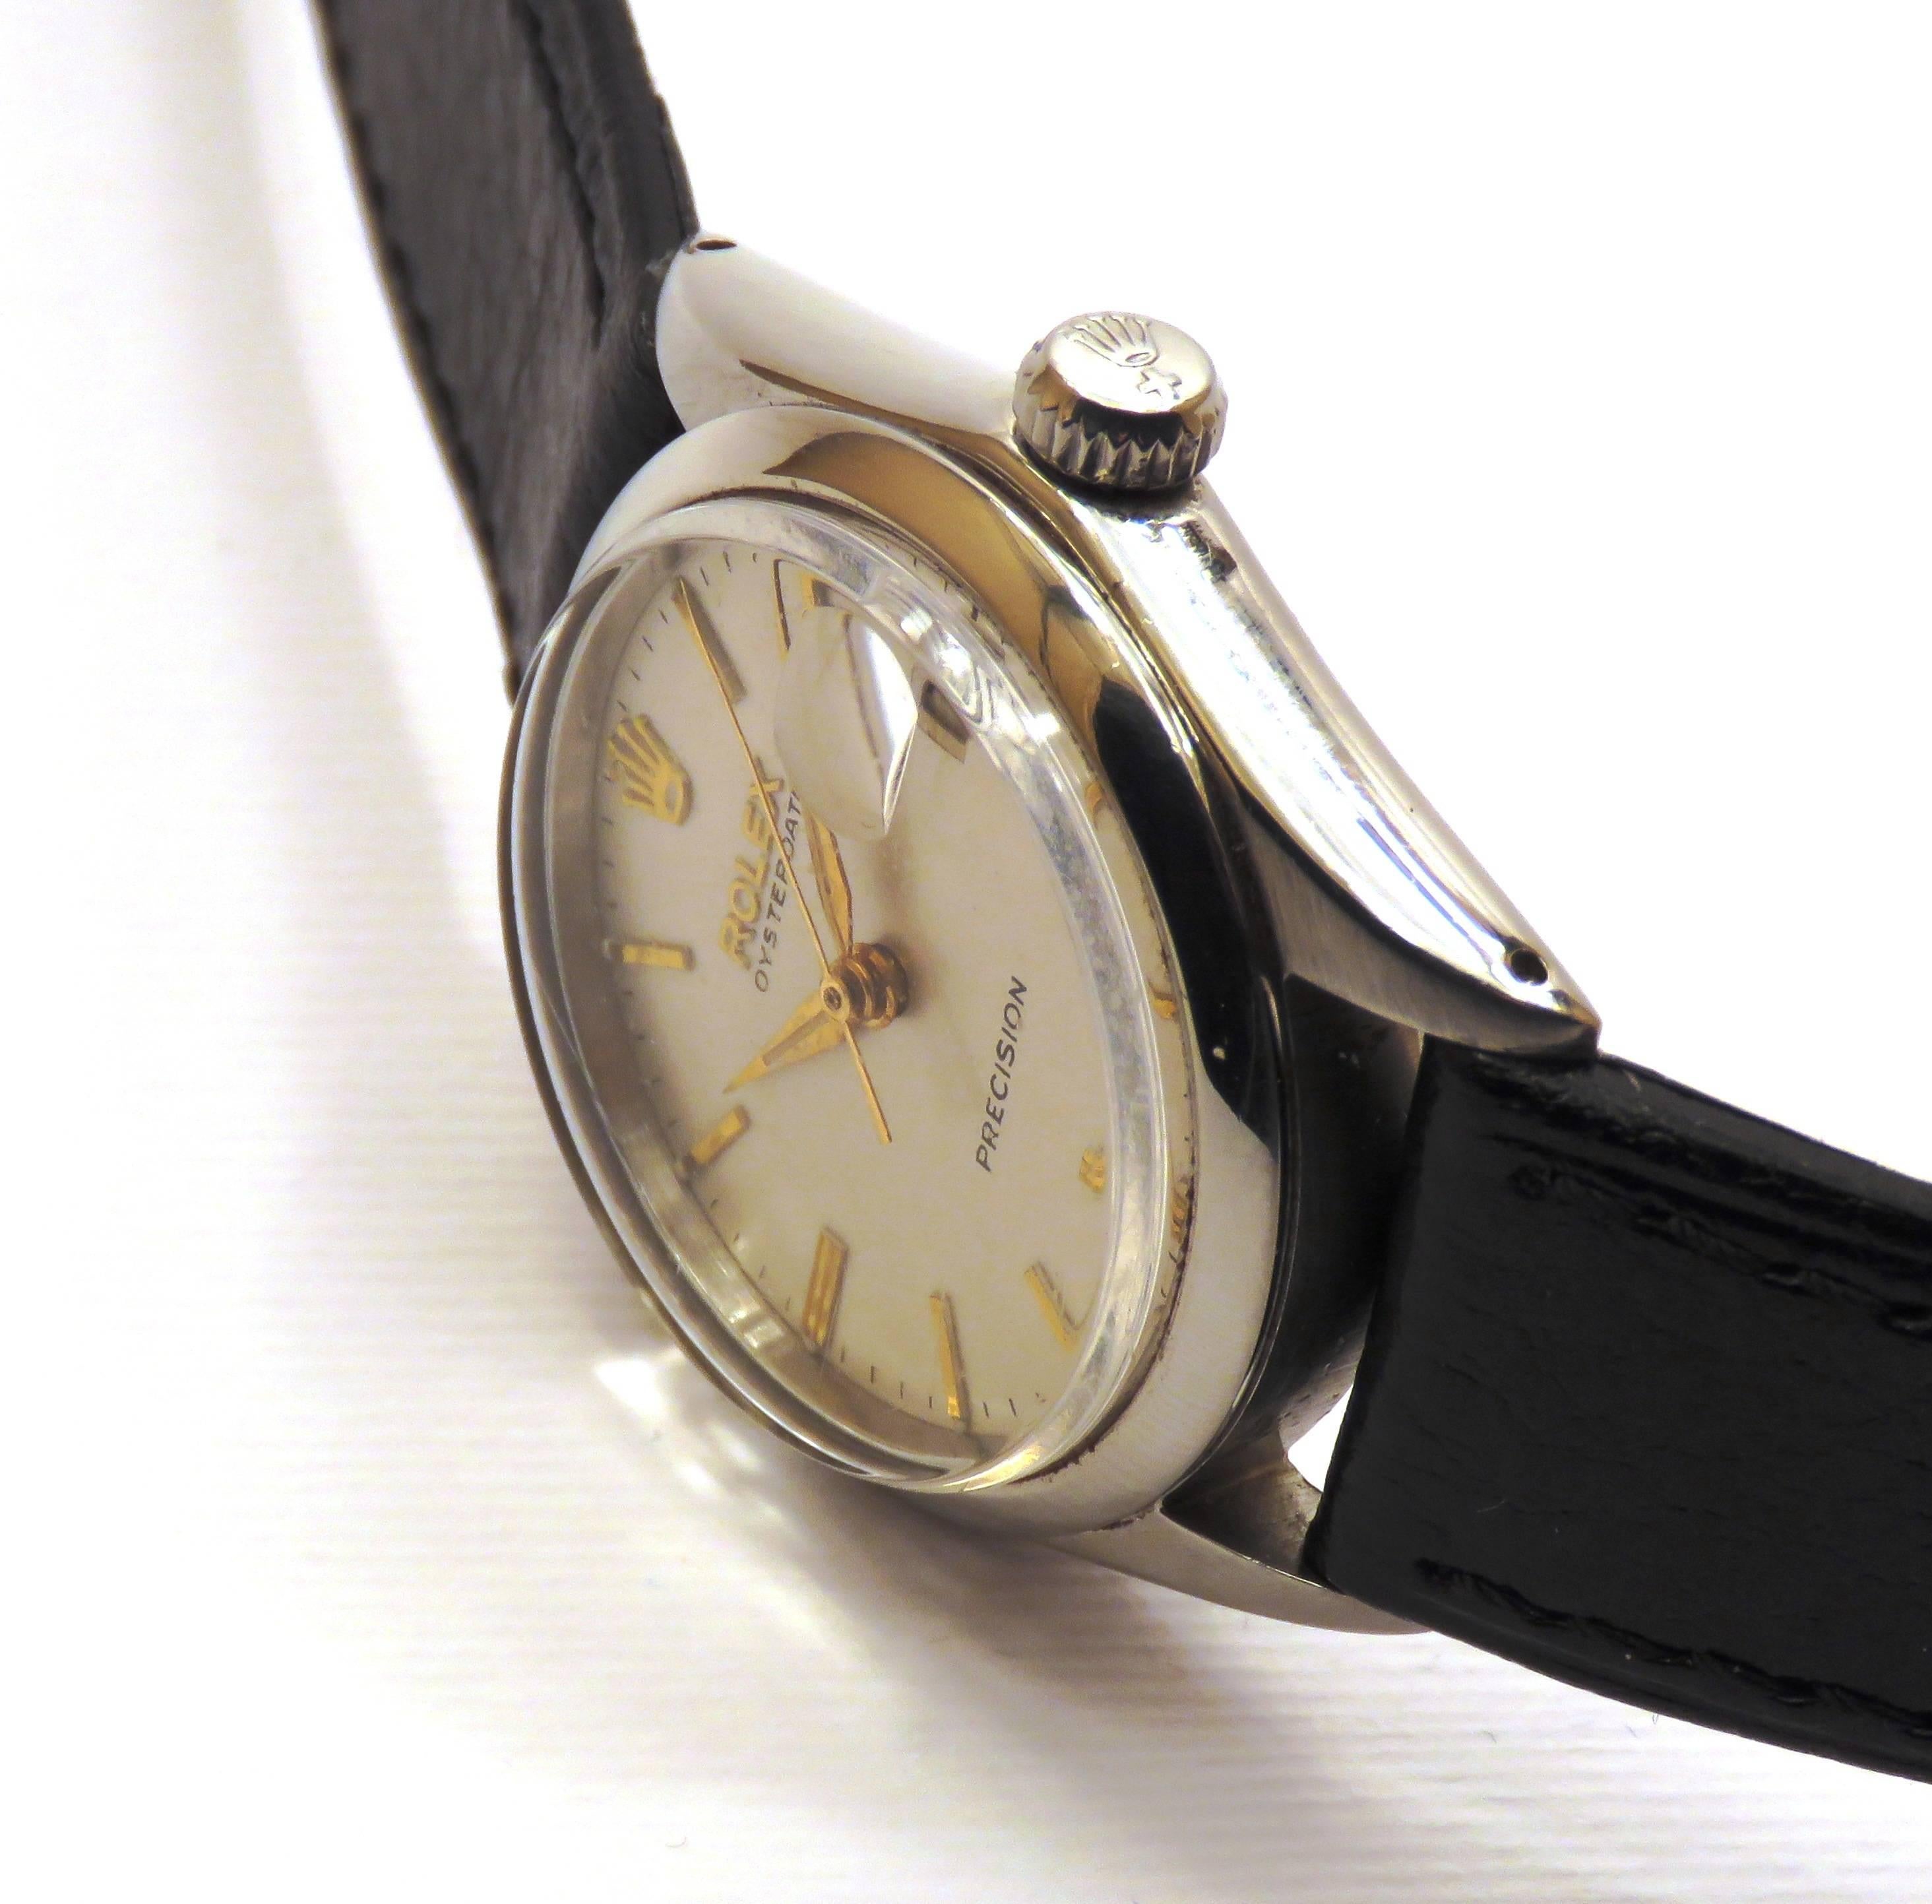 Rolex Stainless Steel Oyster Date Wristwatch Ref 6430 circa 1969
Movement: Manual winding / Case material: Steel
Bracelet material: Leather / Bracelet color: Black
Glass: Plexiglass / Dial: White /Case diameter: 30 mm
A very nice Rolex in excellent